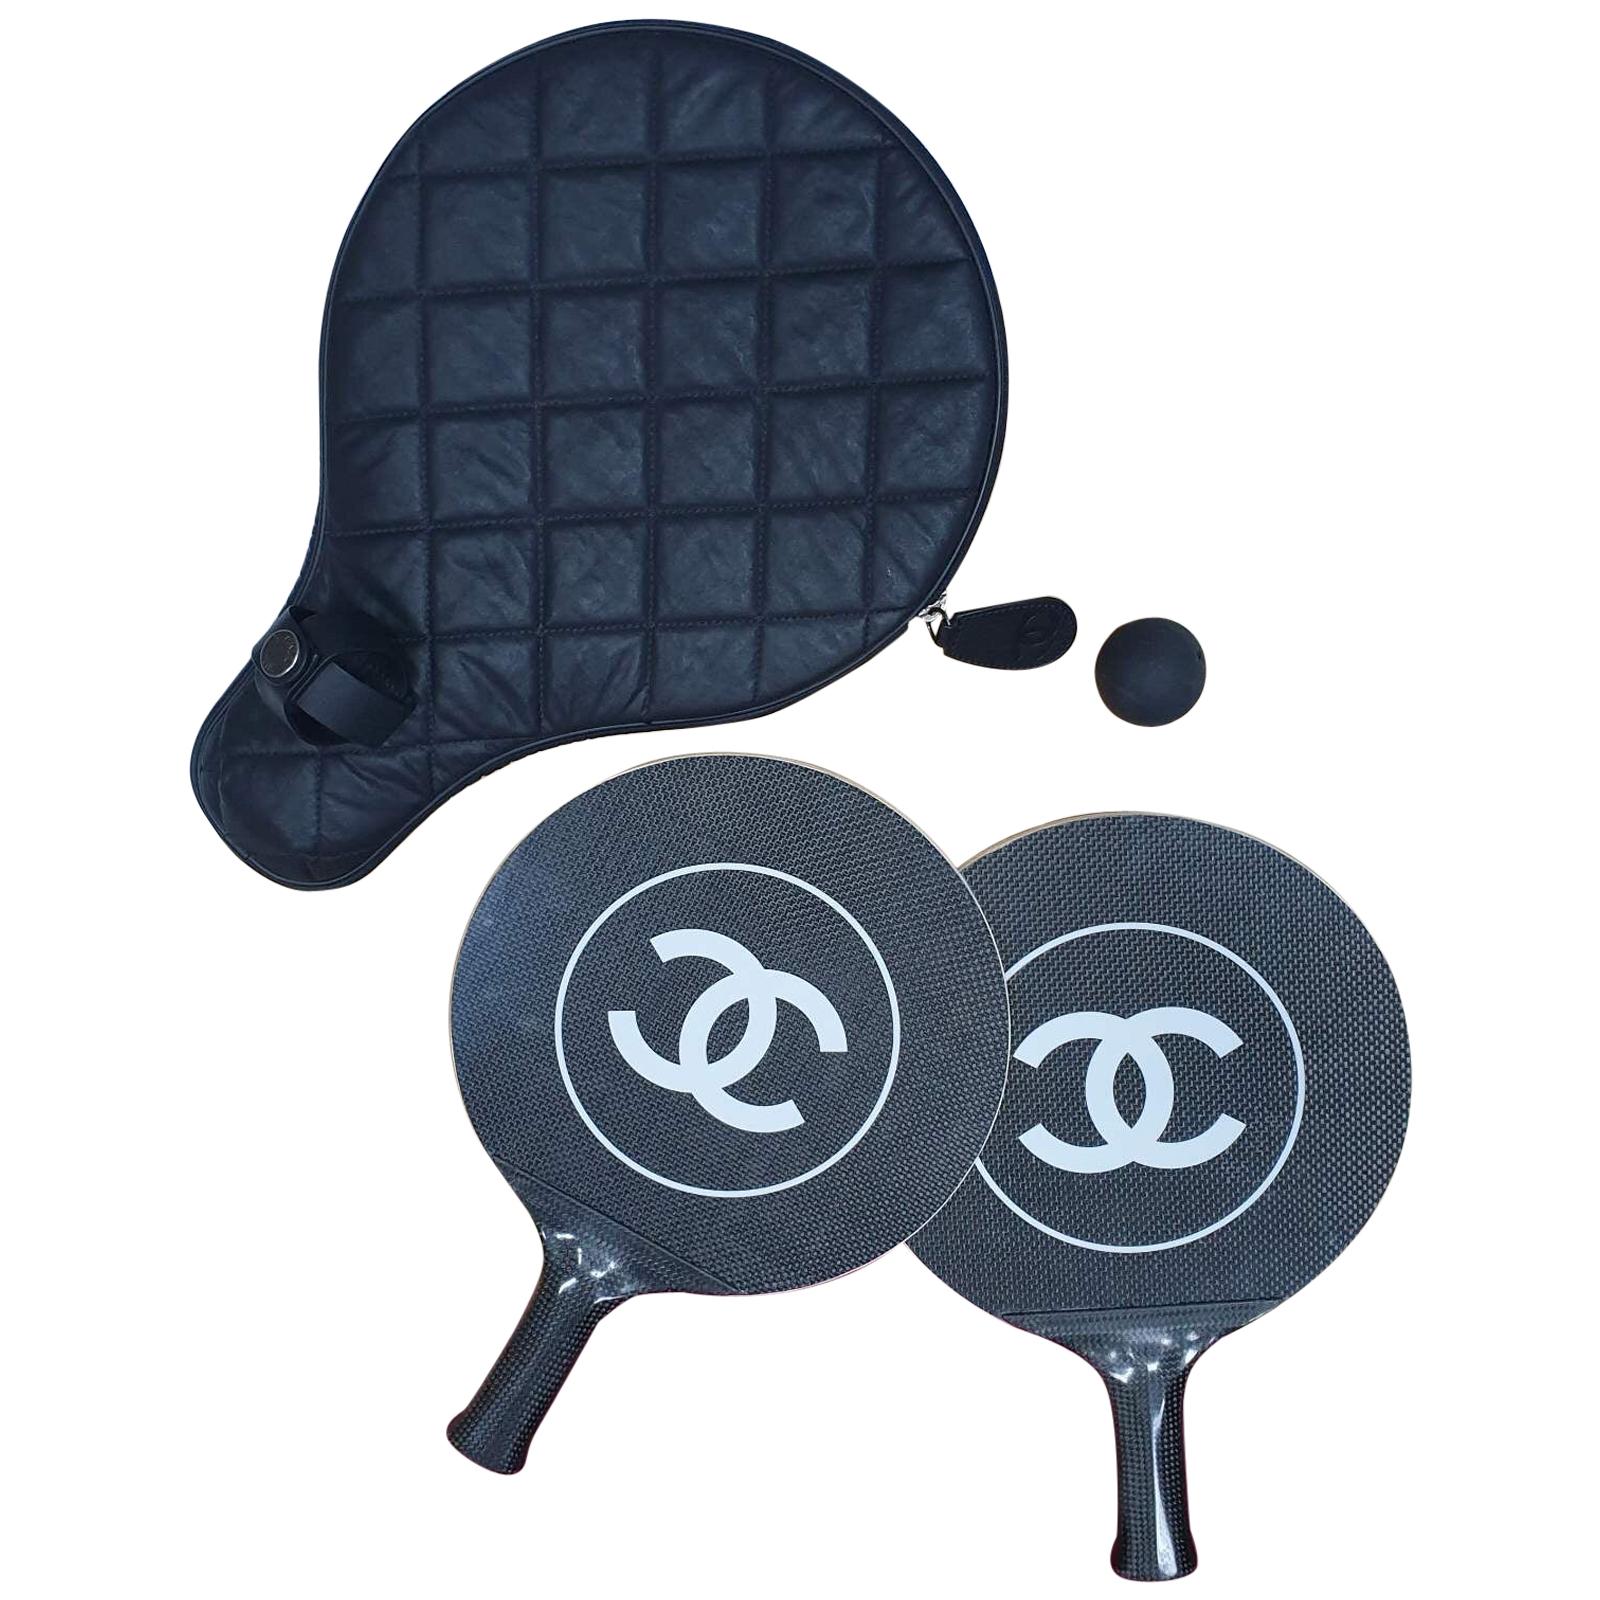 Chanel Tennis Ball Set - Black Other, Accessories - CHA40125